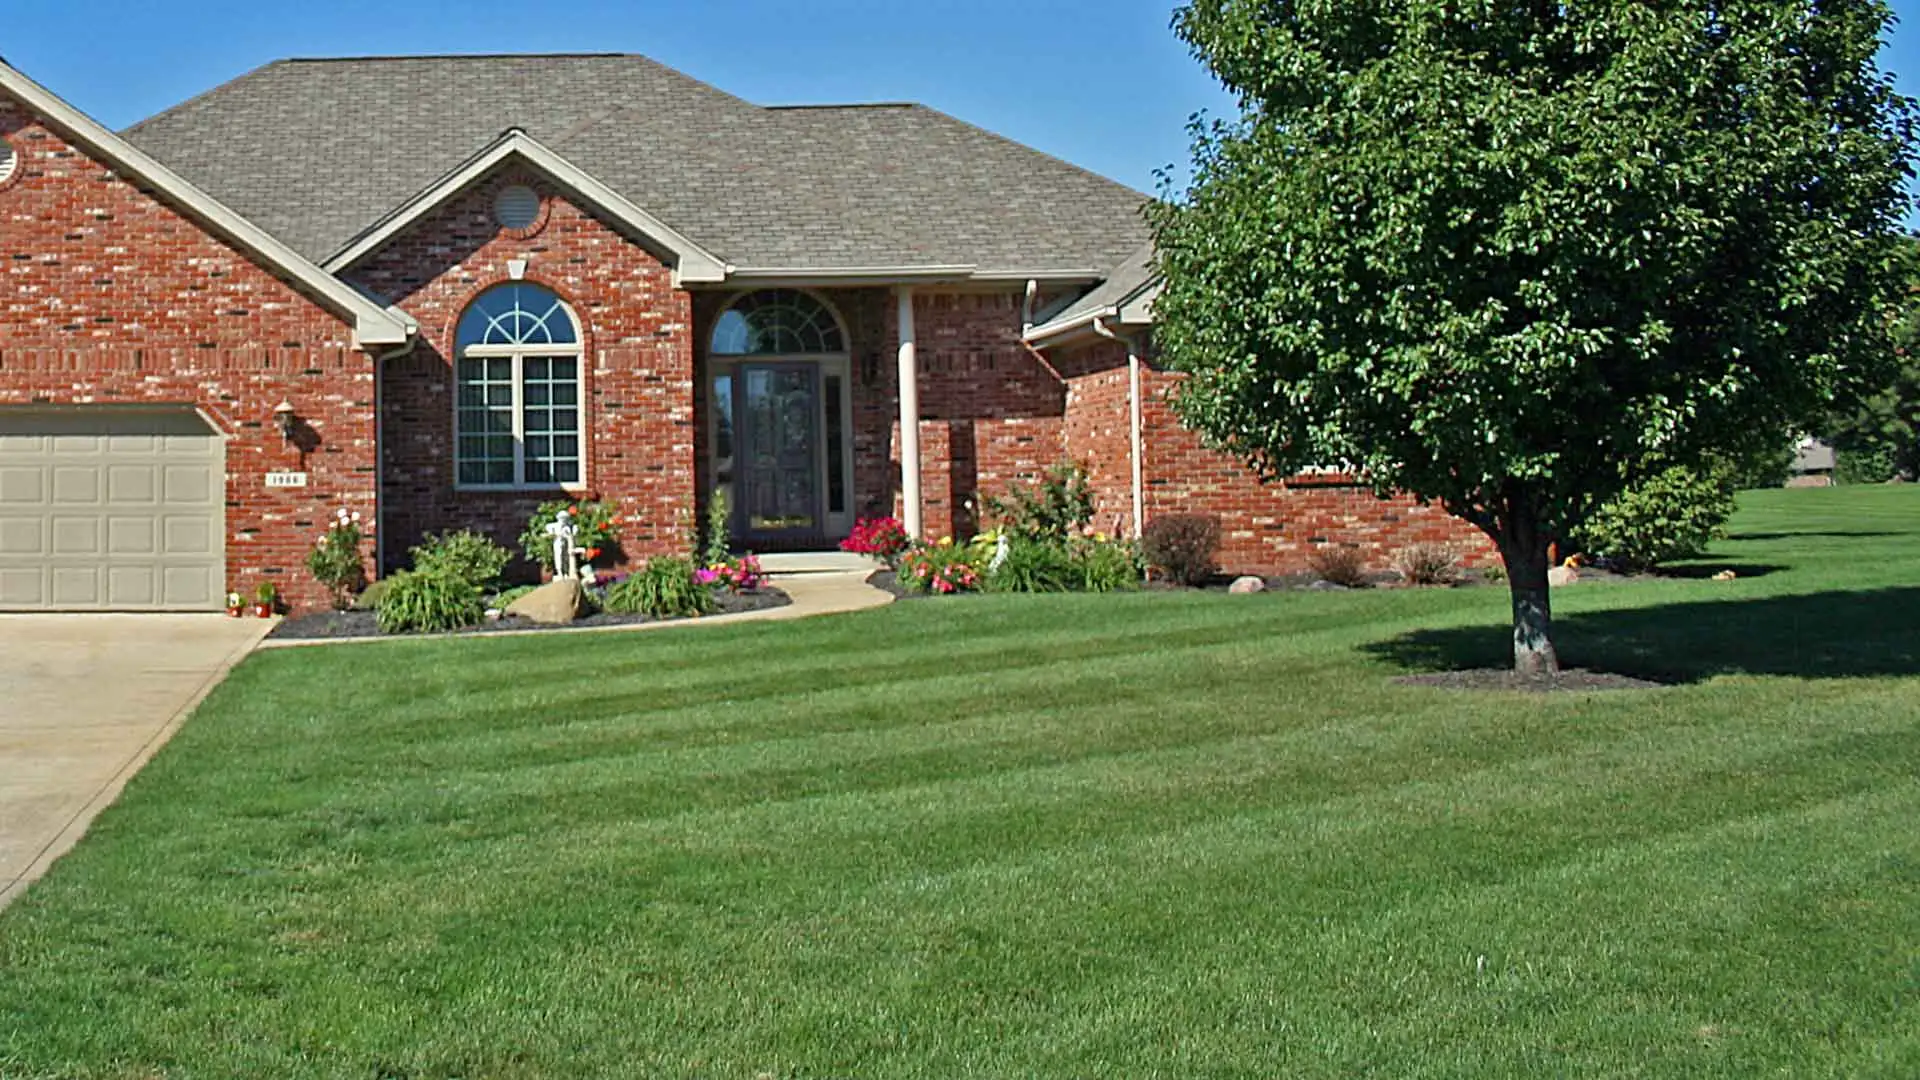 Well maintained lawn and landscaping at residential property.